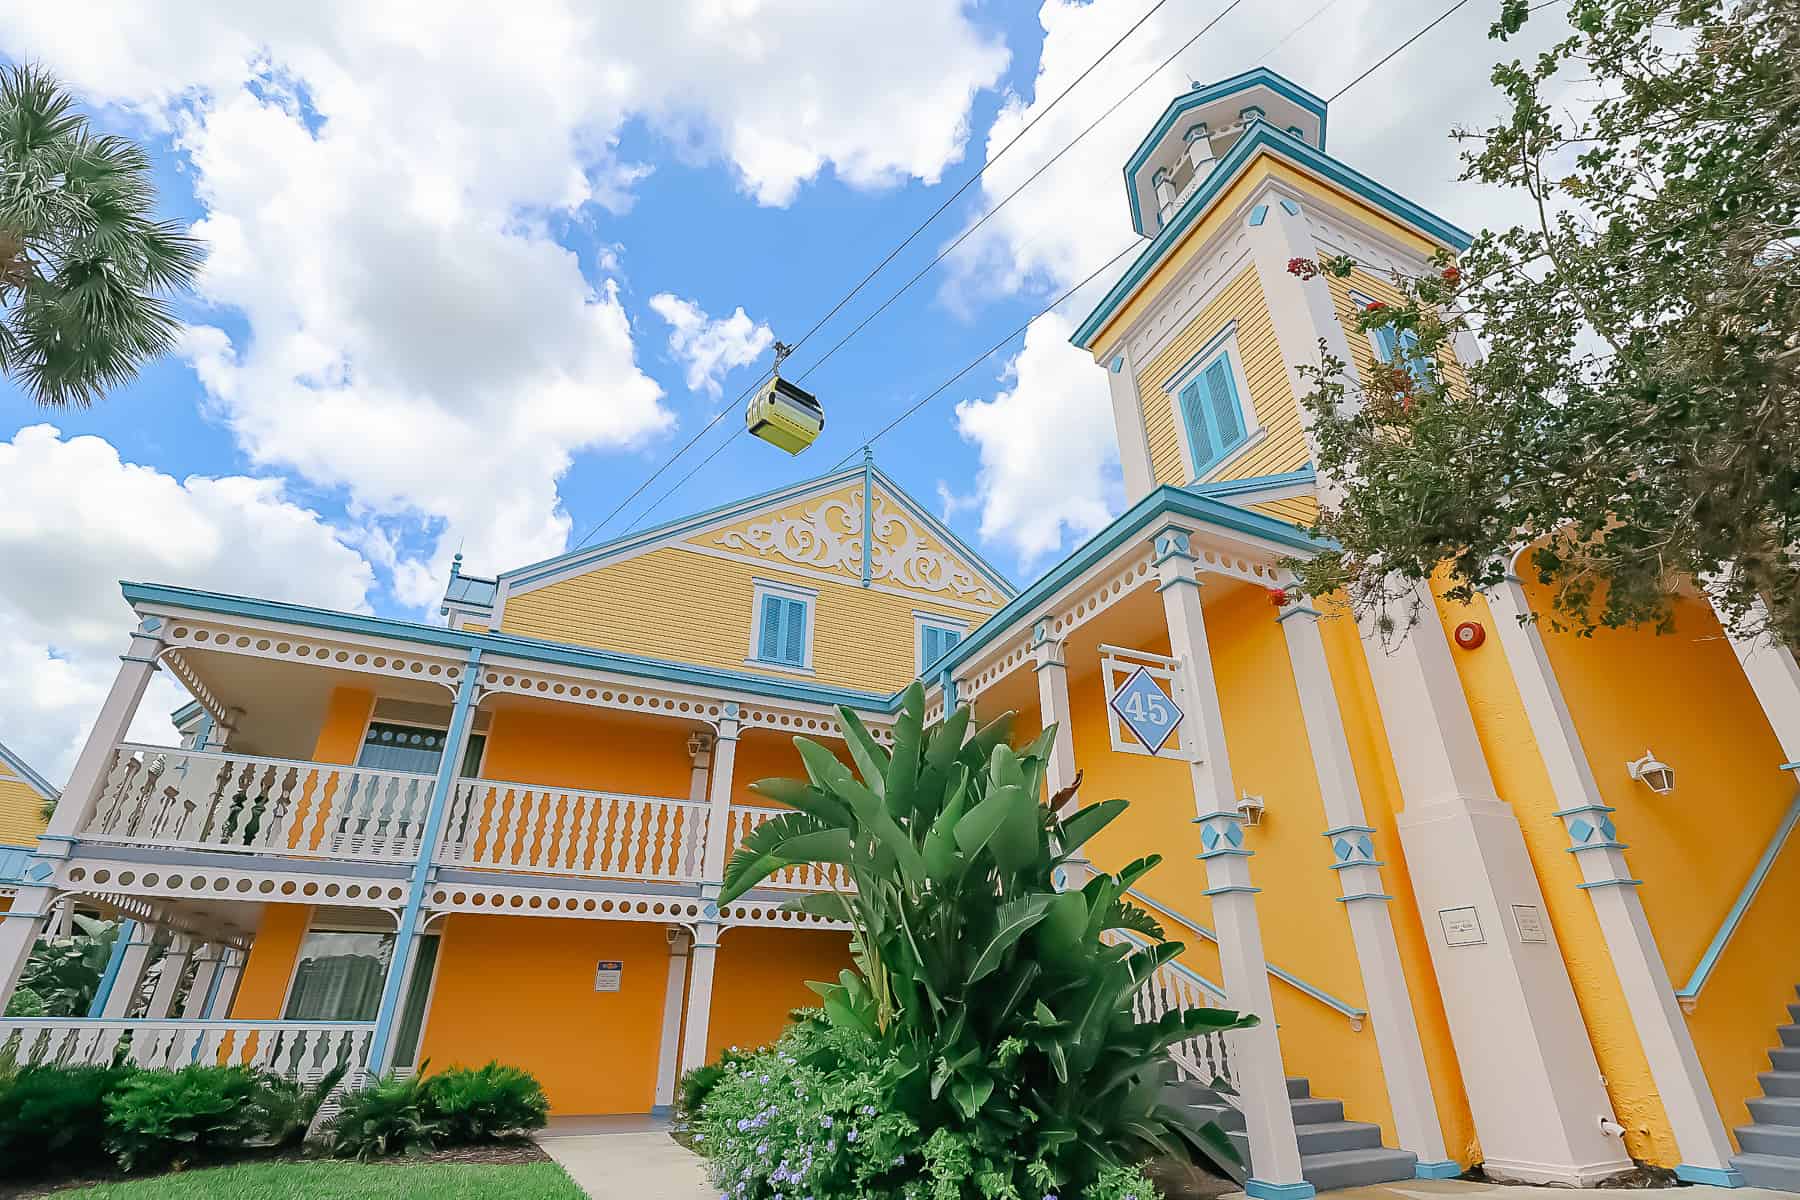 The buildings in Jamaica at Disney's Caribbean Beach are yellow with blue and white trim. 